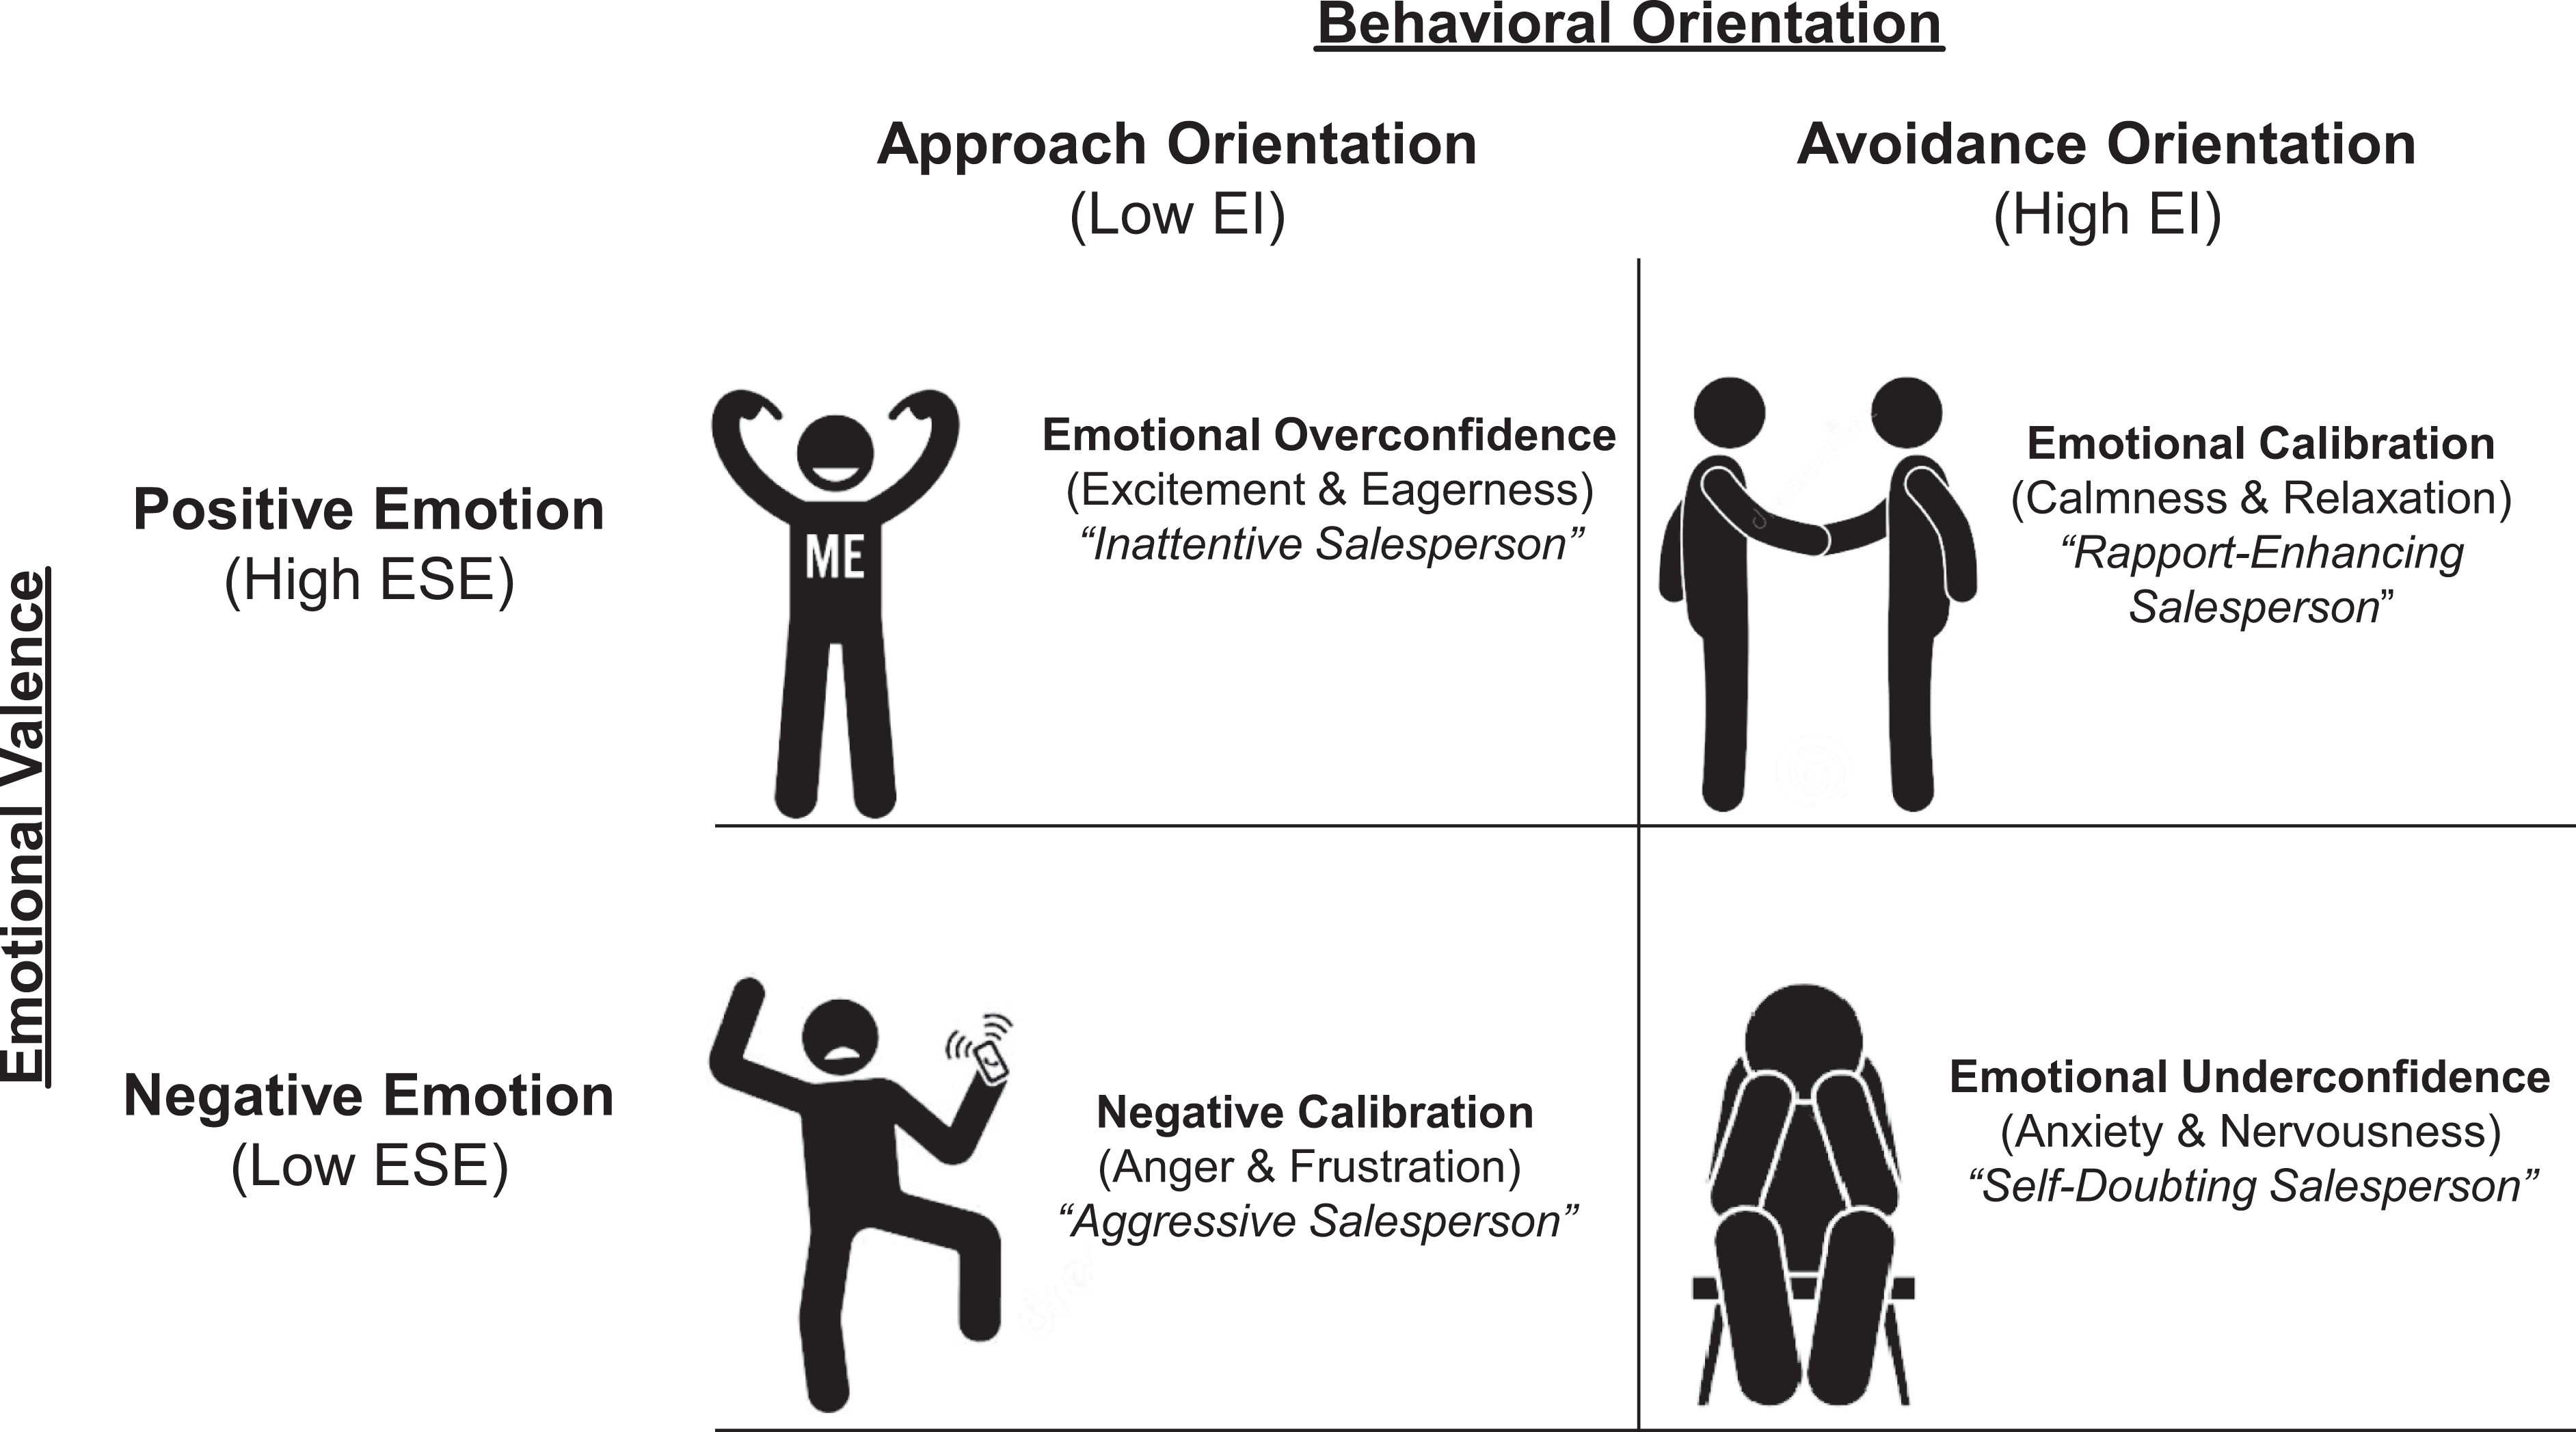 Image of figure used in study, showing relationship between emotional valence and behavioral orientation.